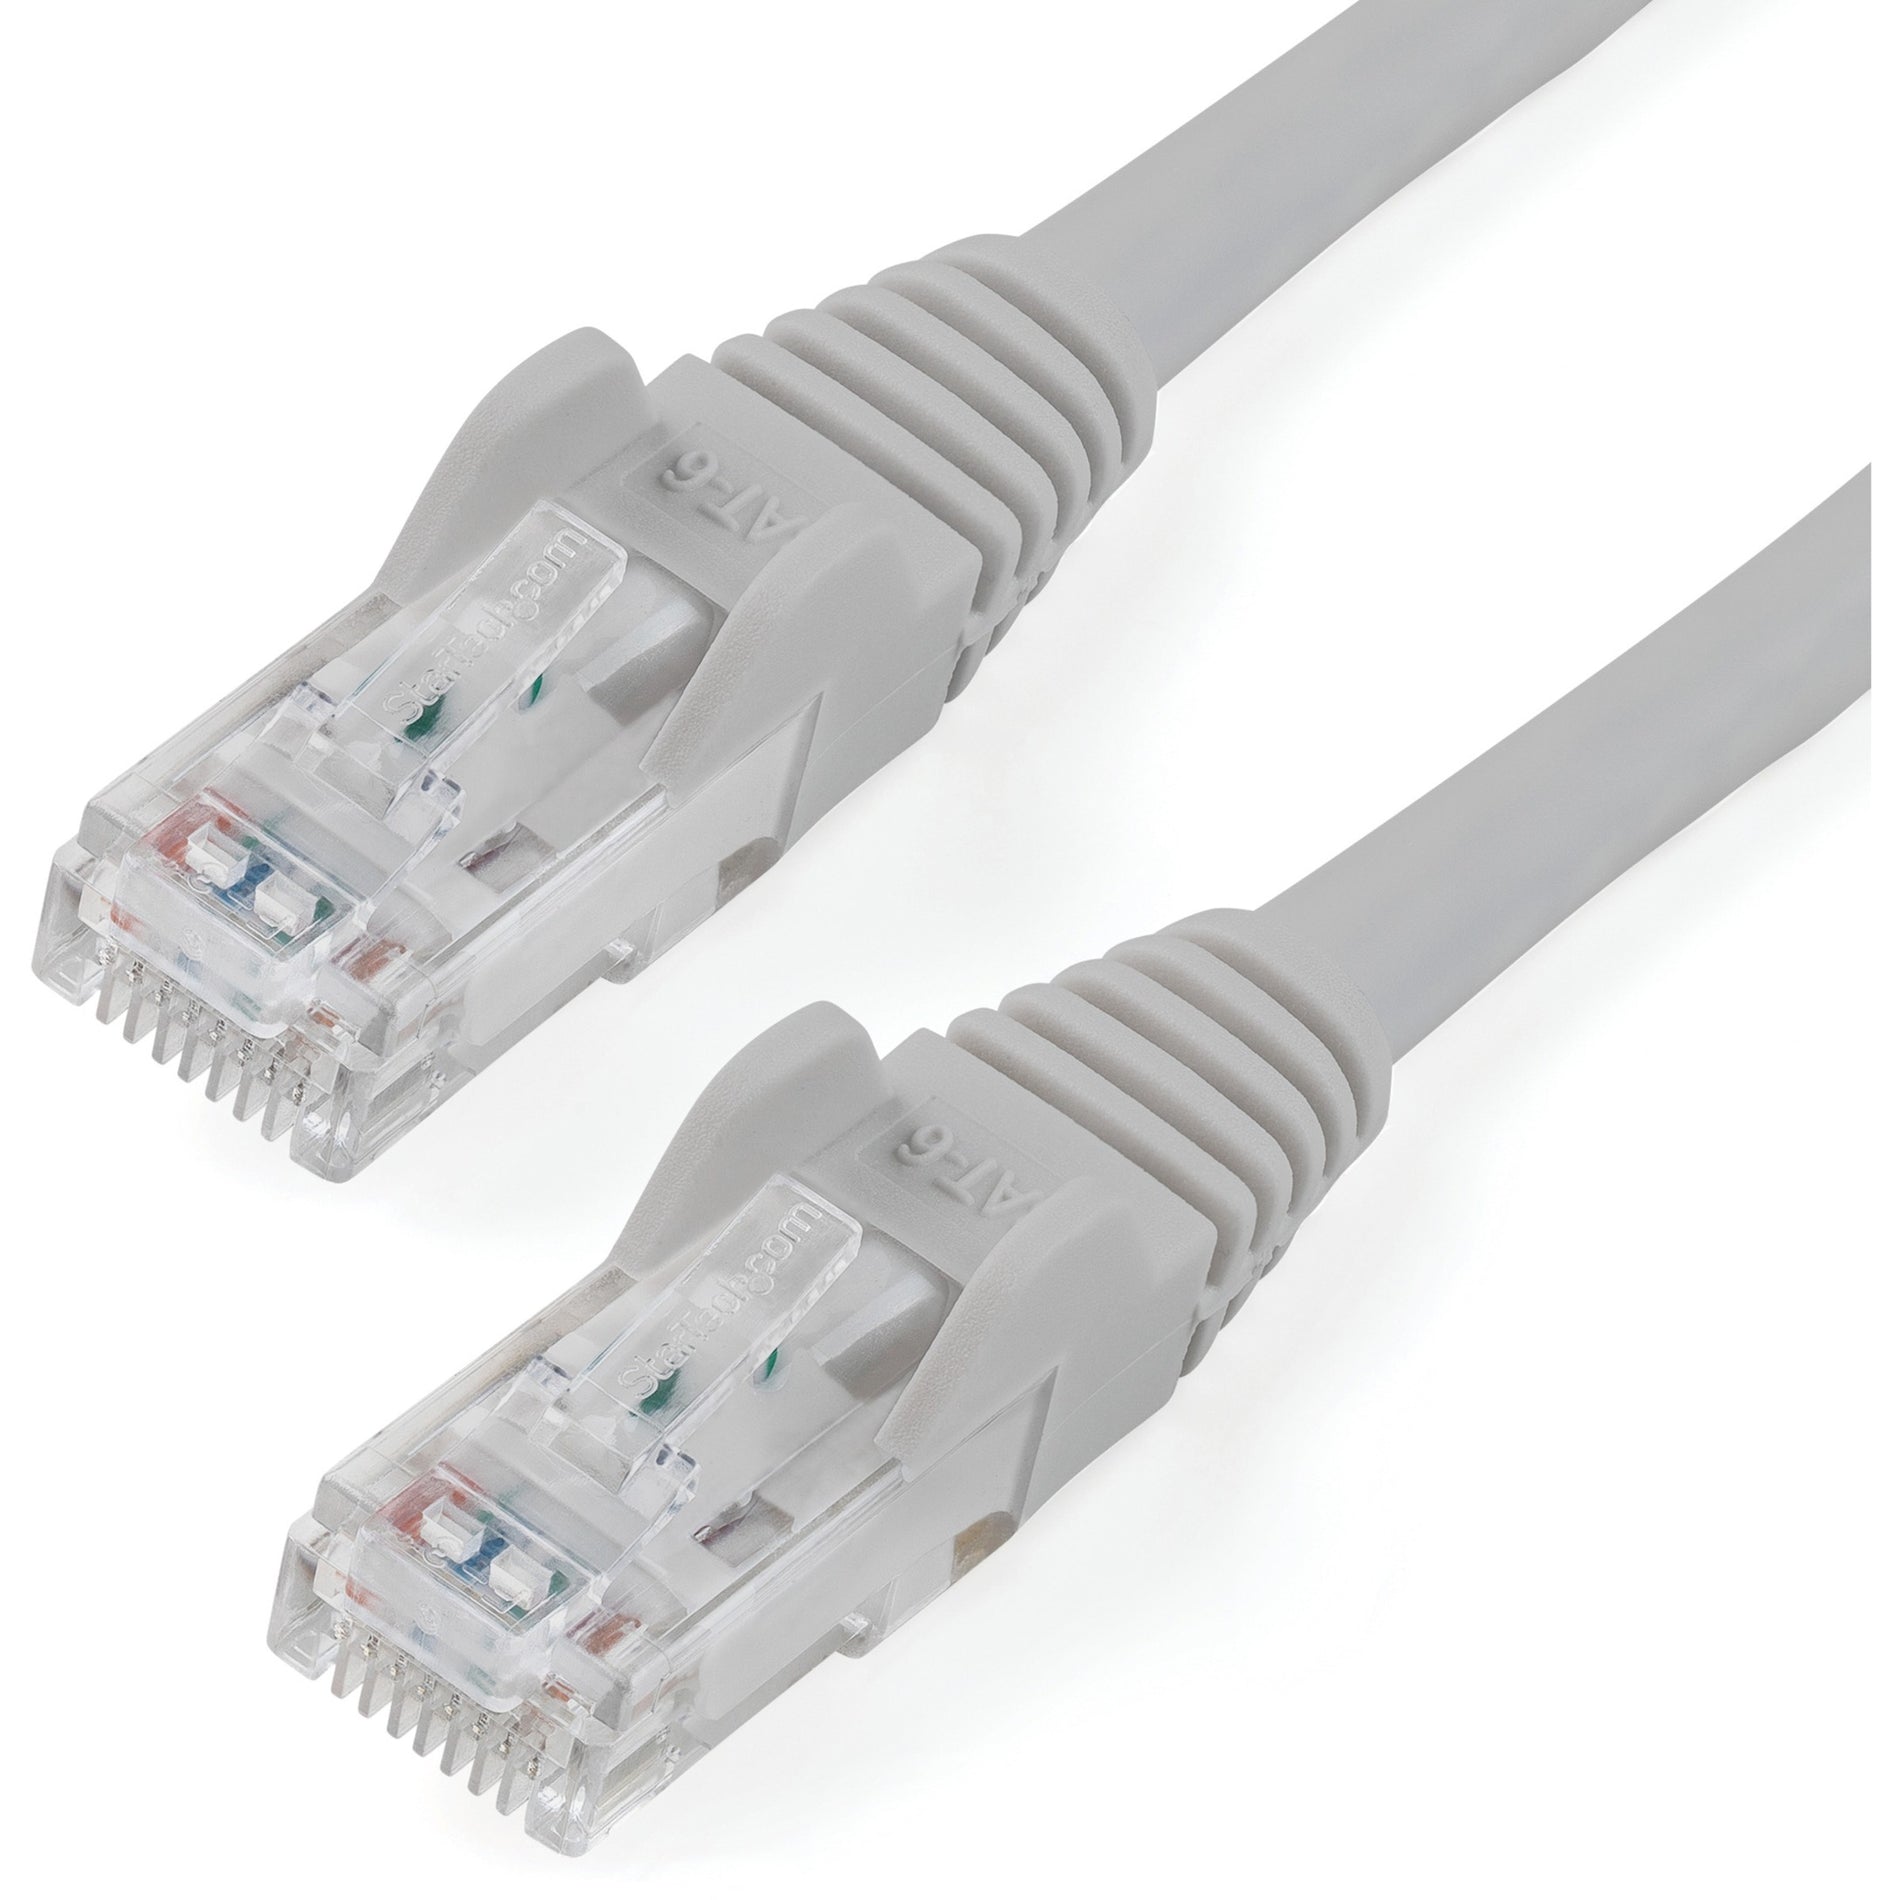 StarTech.com N6PATCH10GR 10 ft Gray Snagless Cat6 UTP Patch Cable, Corrosion Resistant, 10 Gbit/s Data Transfer Rate